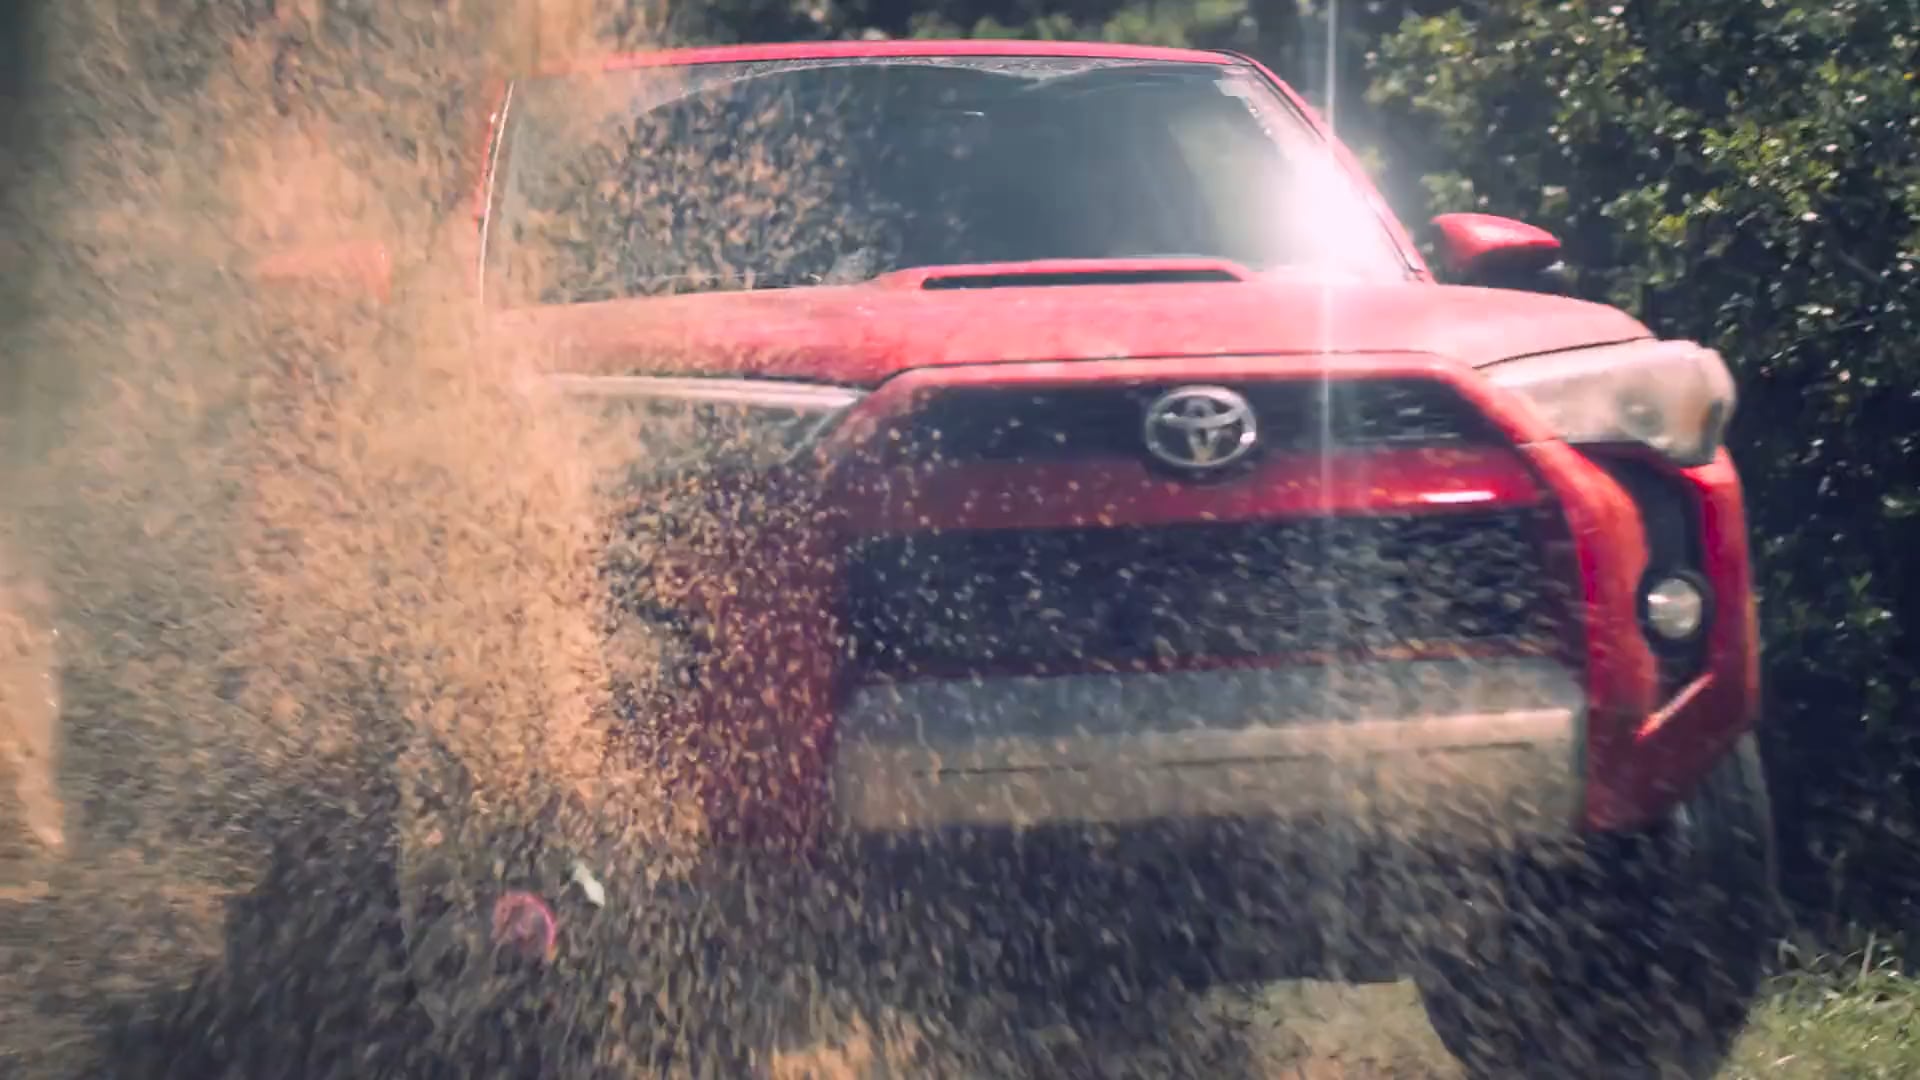 Toyota Commercial (1st AD) on Vimeo